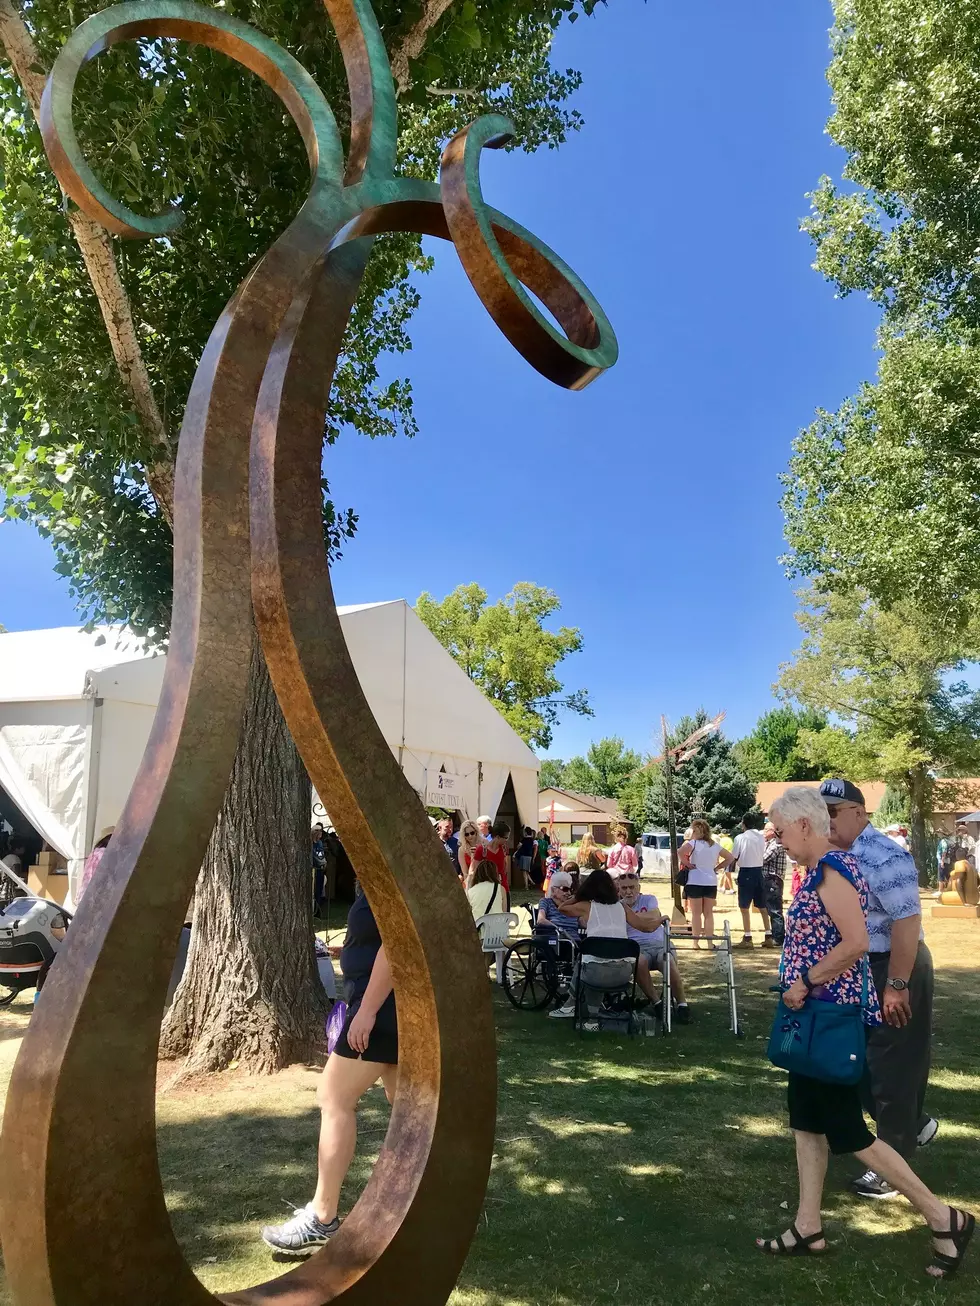 Over 2,000 Sculptures to be Displayed at 38th Annual Sculpture Show in Colorado